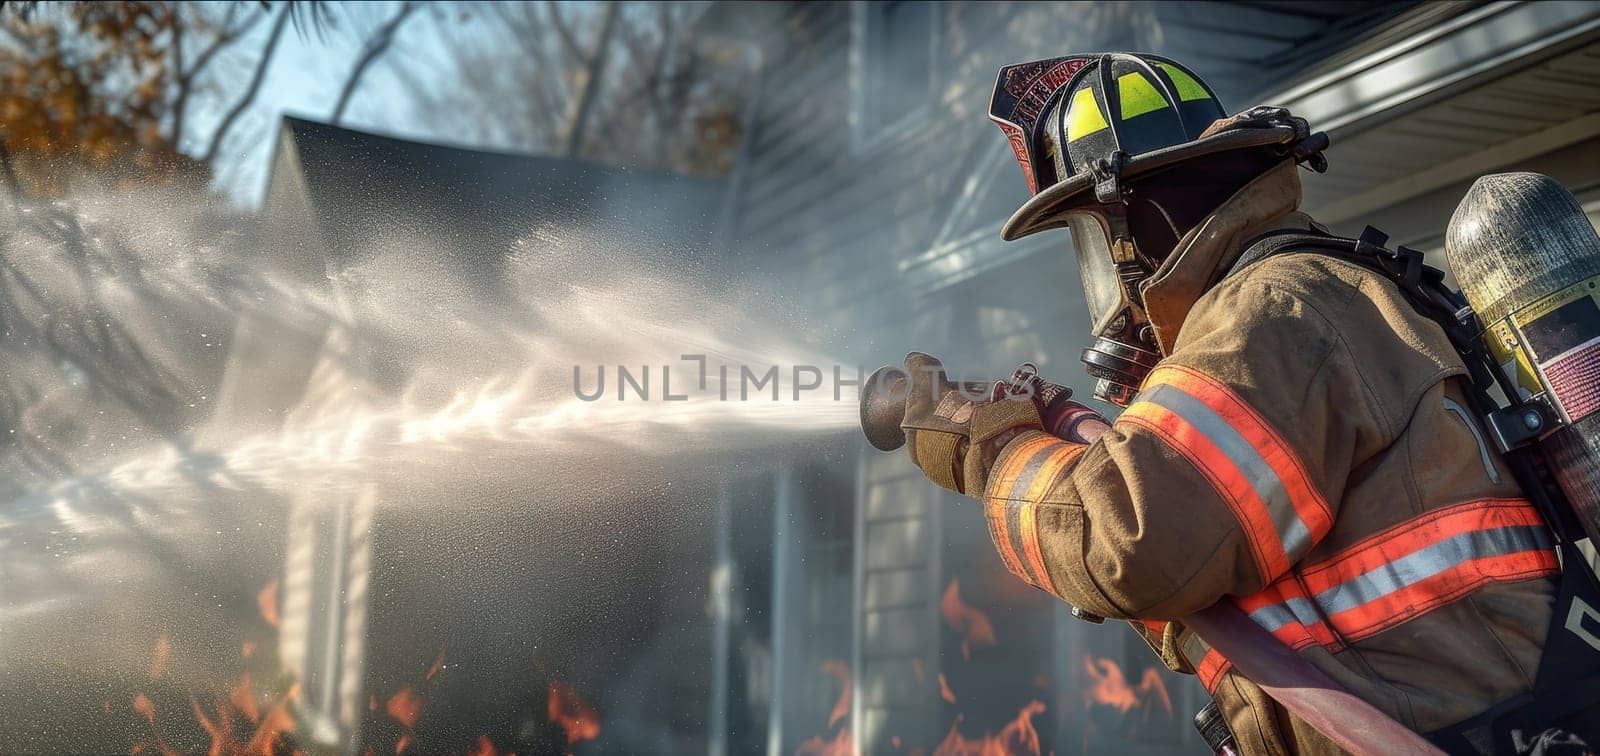 Firefighter in action, spraying water to extinguish flames engulfing a residential house, showcasing bravery and emergency response. by sfinks